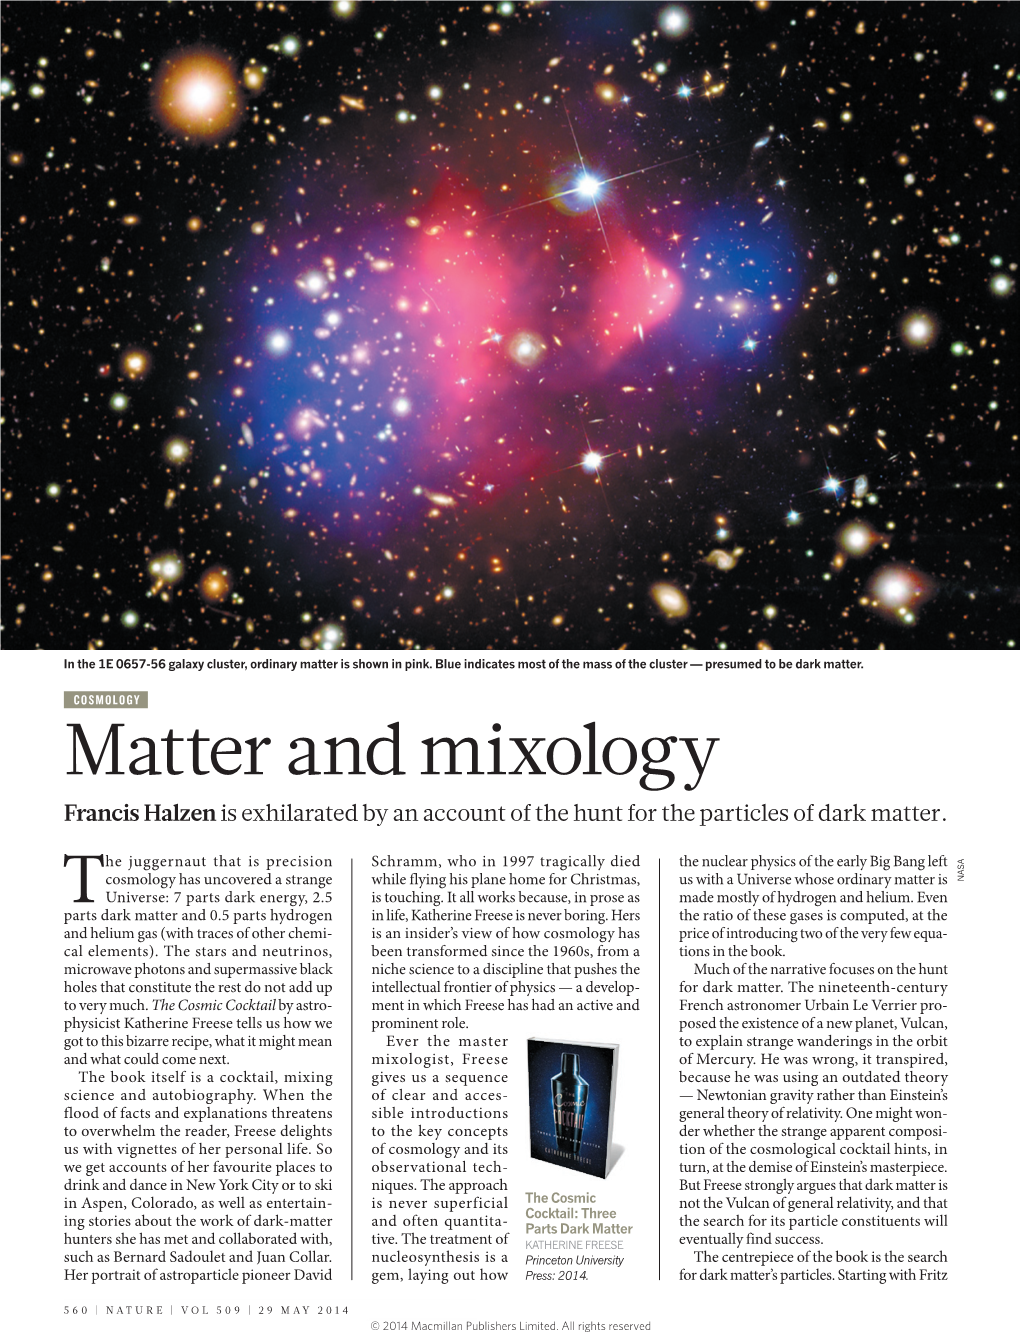 Matter and Mixology Francis Halzen Is Exhilarated by an Account of the Hunt for the Particles of Dark Matter